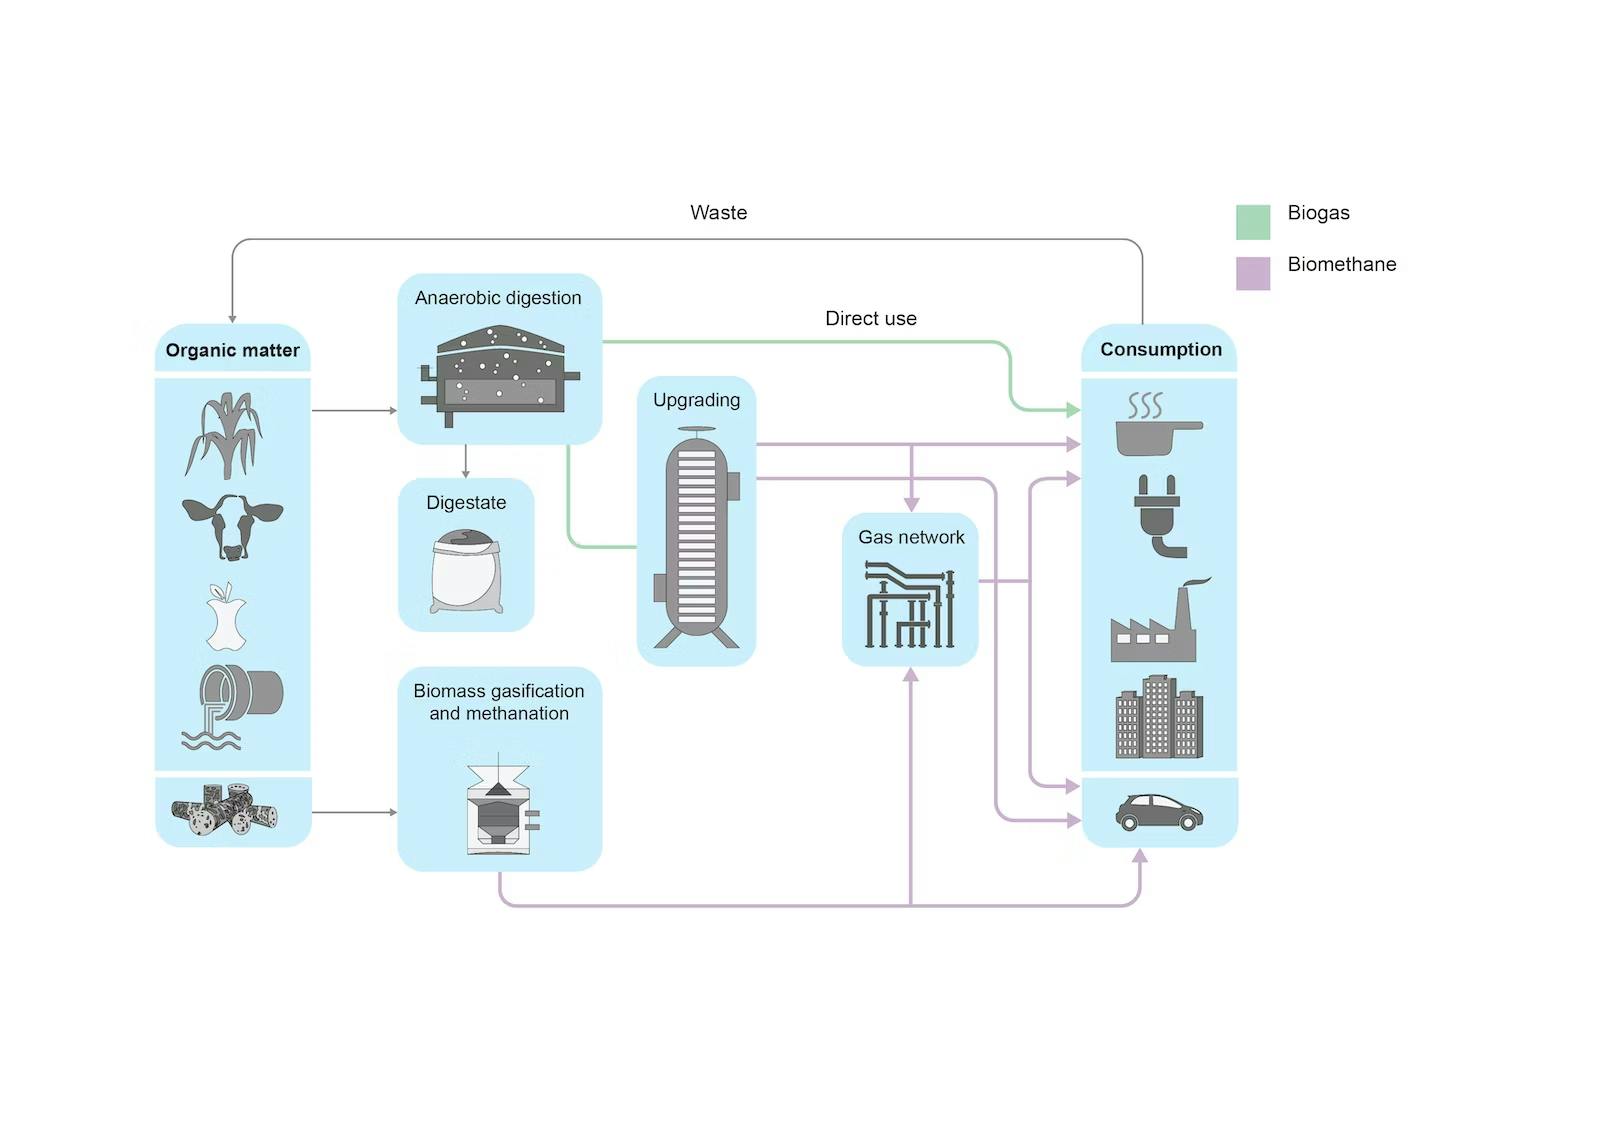 Multiple production pathways for biogas and biomethane